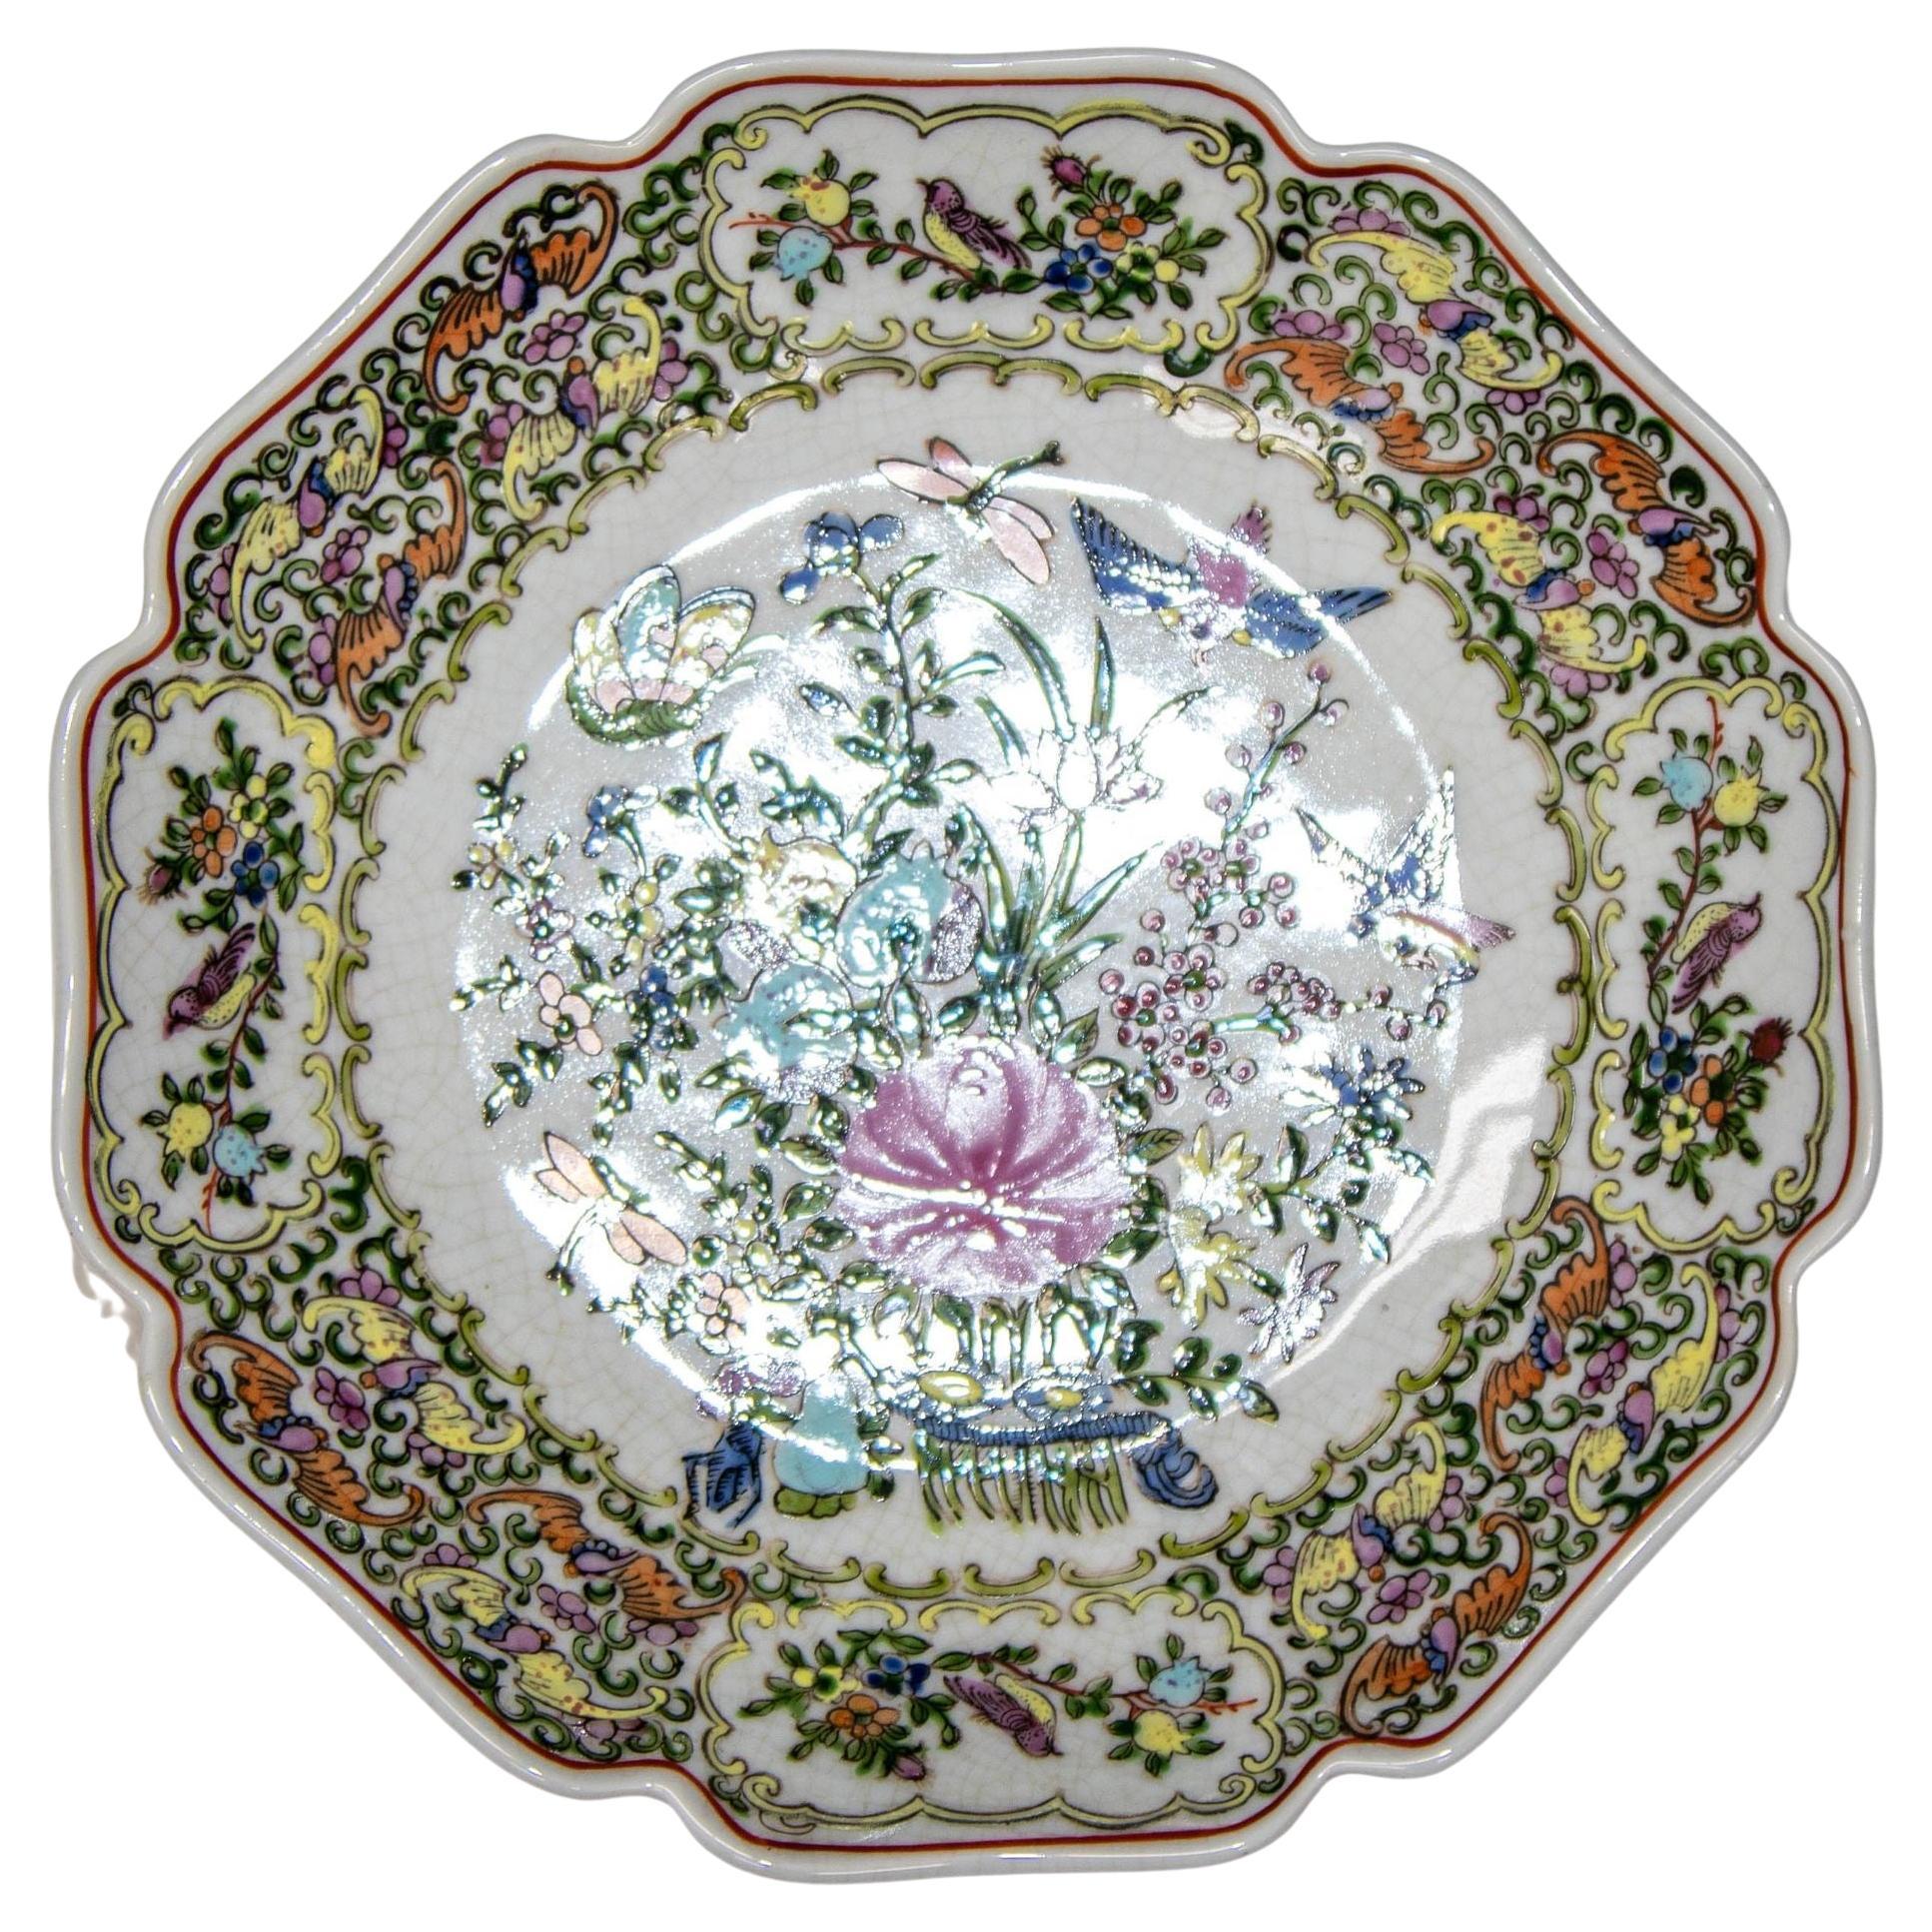 Vintage famille Rose Porcelain plate with birds and flowers hand painted decor For Sale